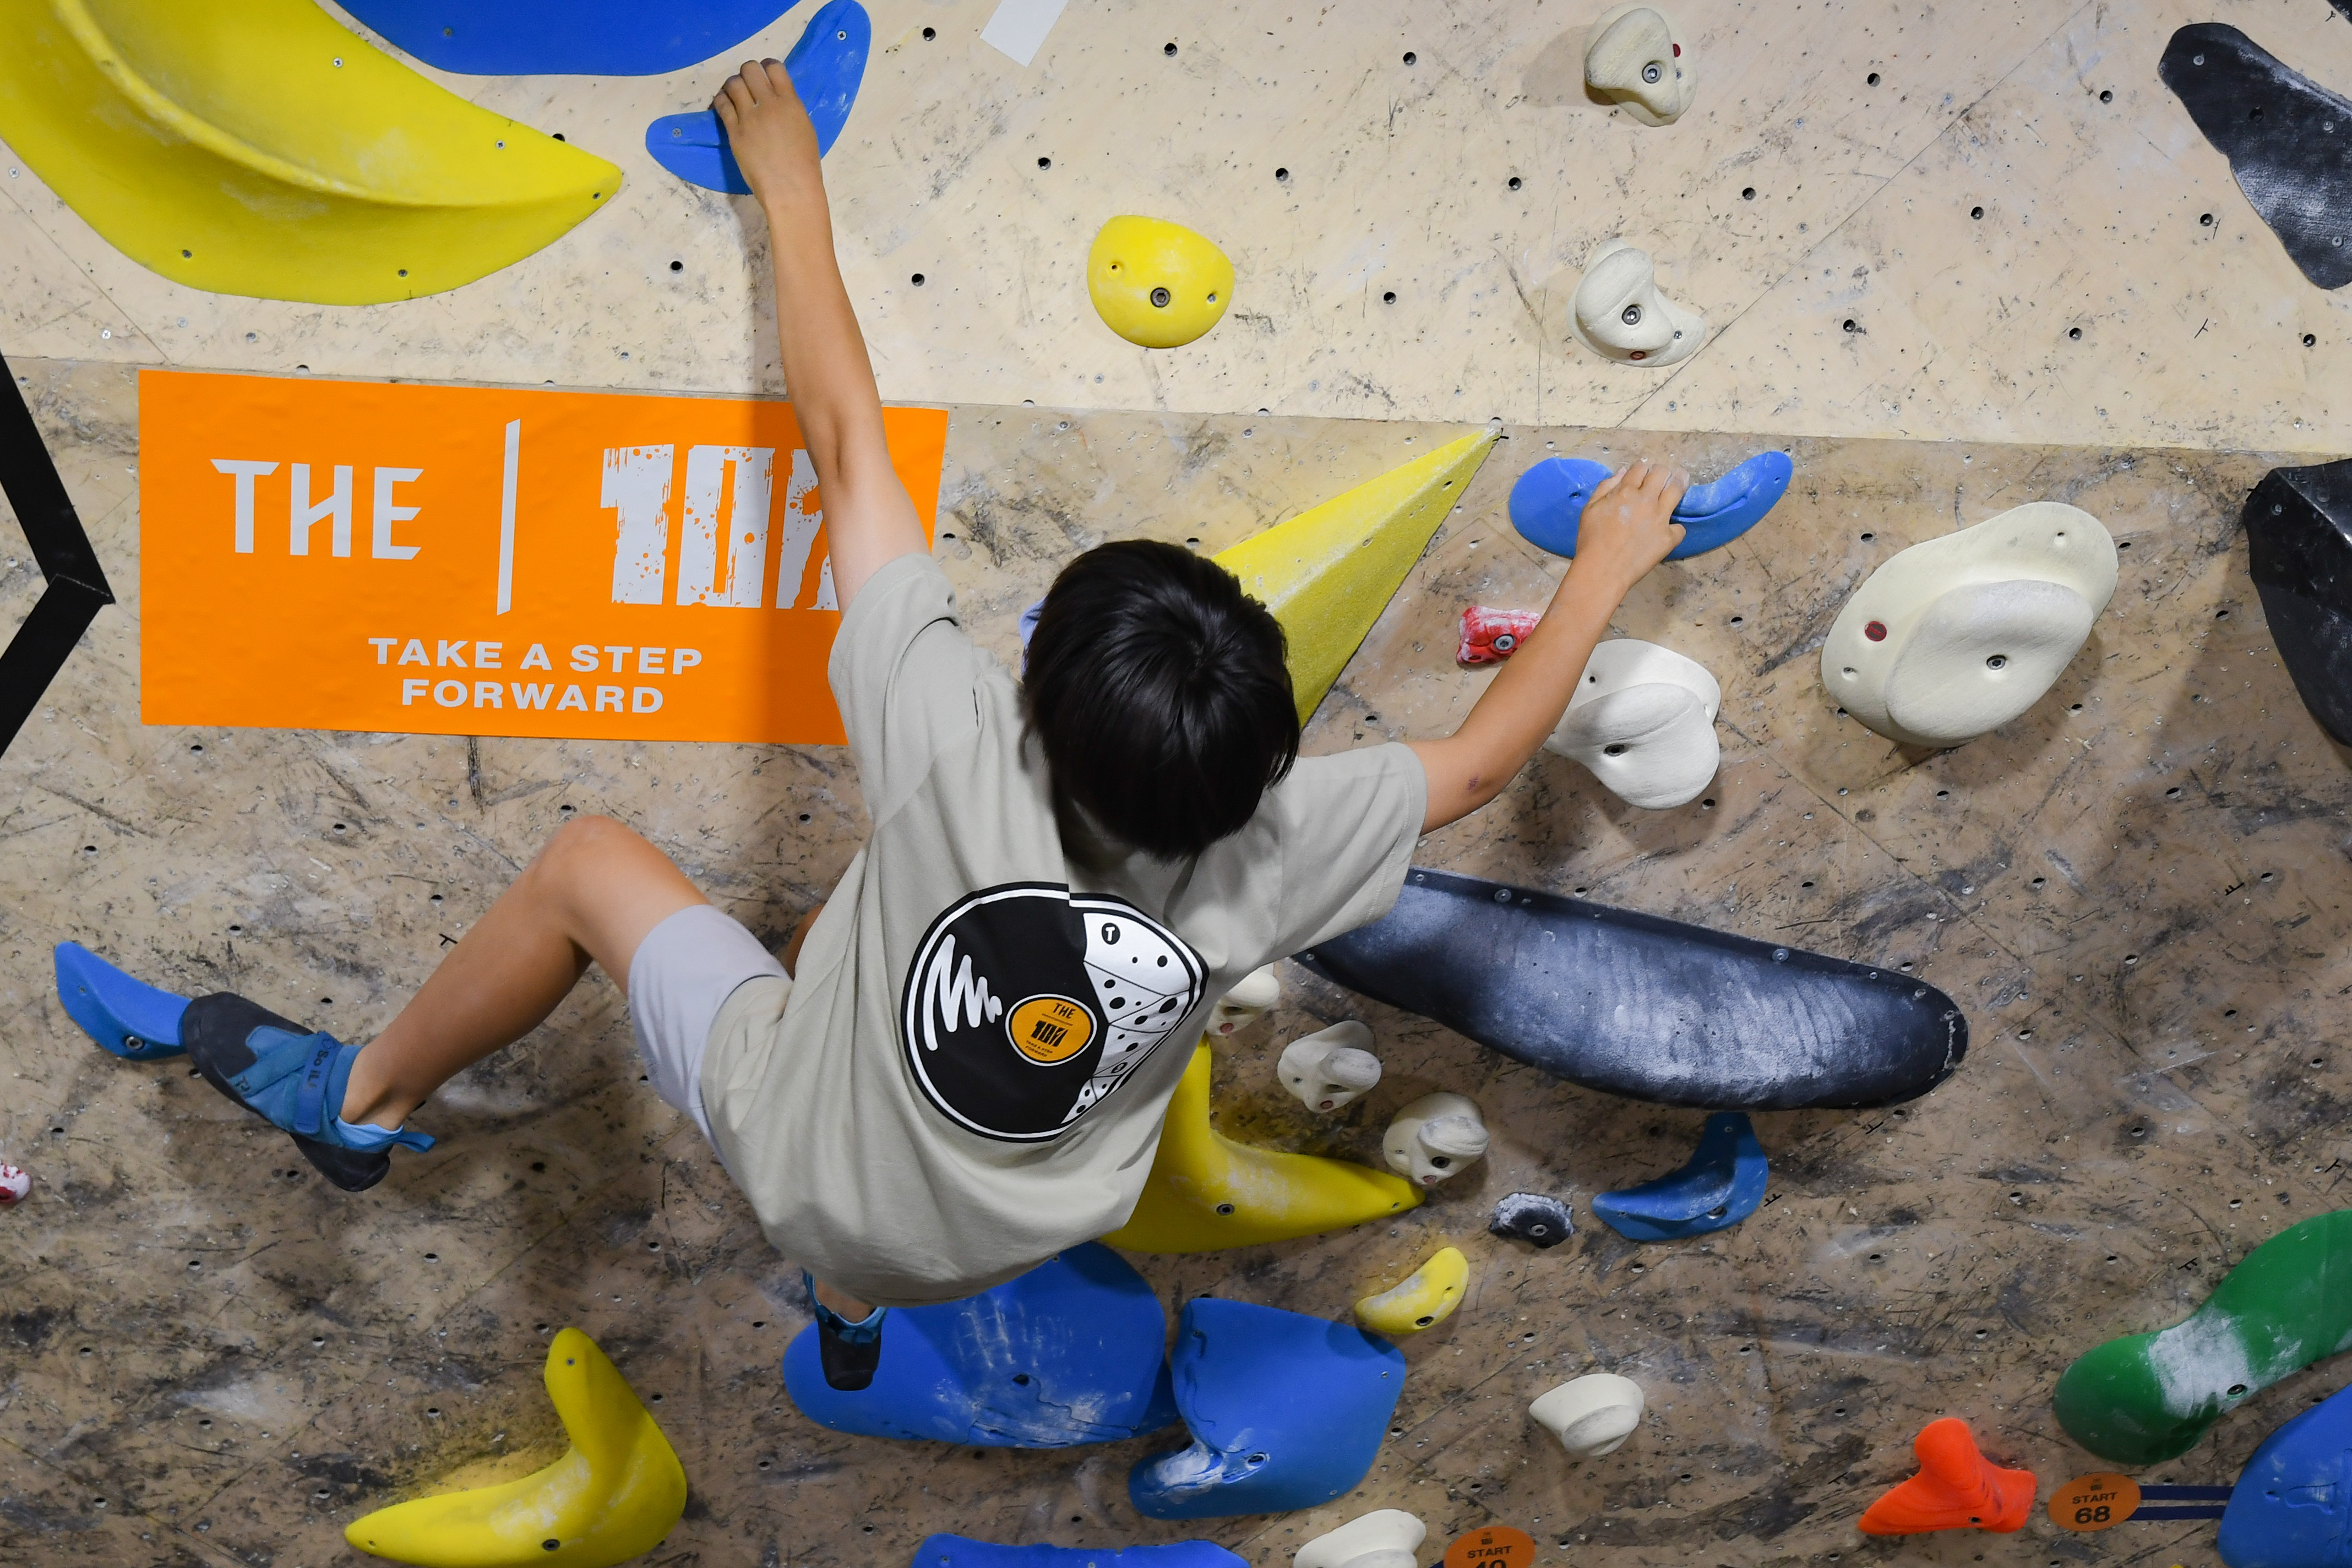 THE|NUMBERが打ち出すFUN CLIMBING COMPETITION 